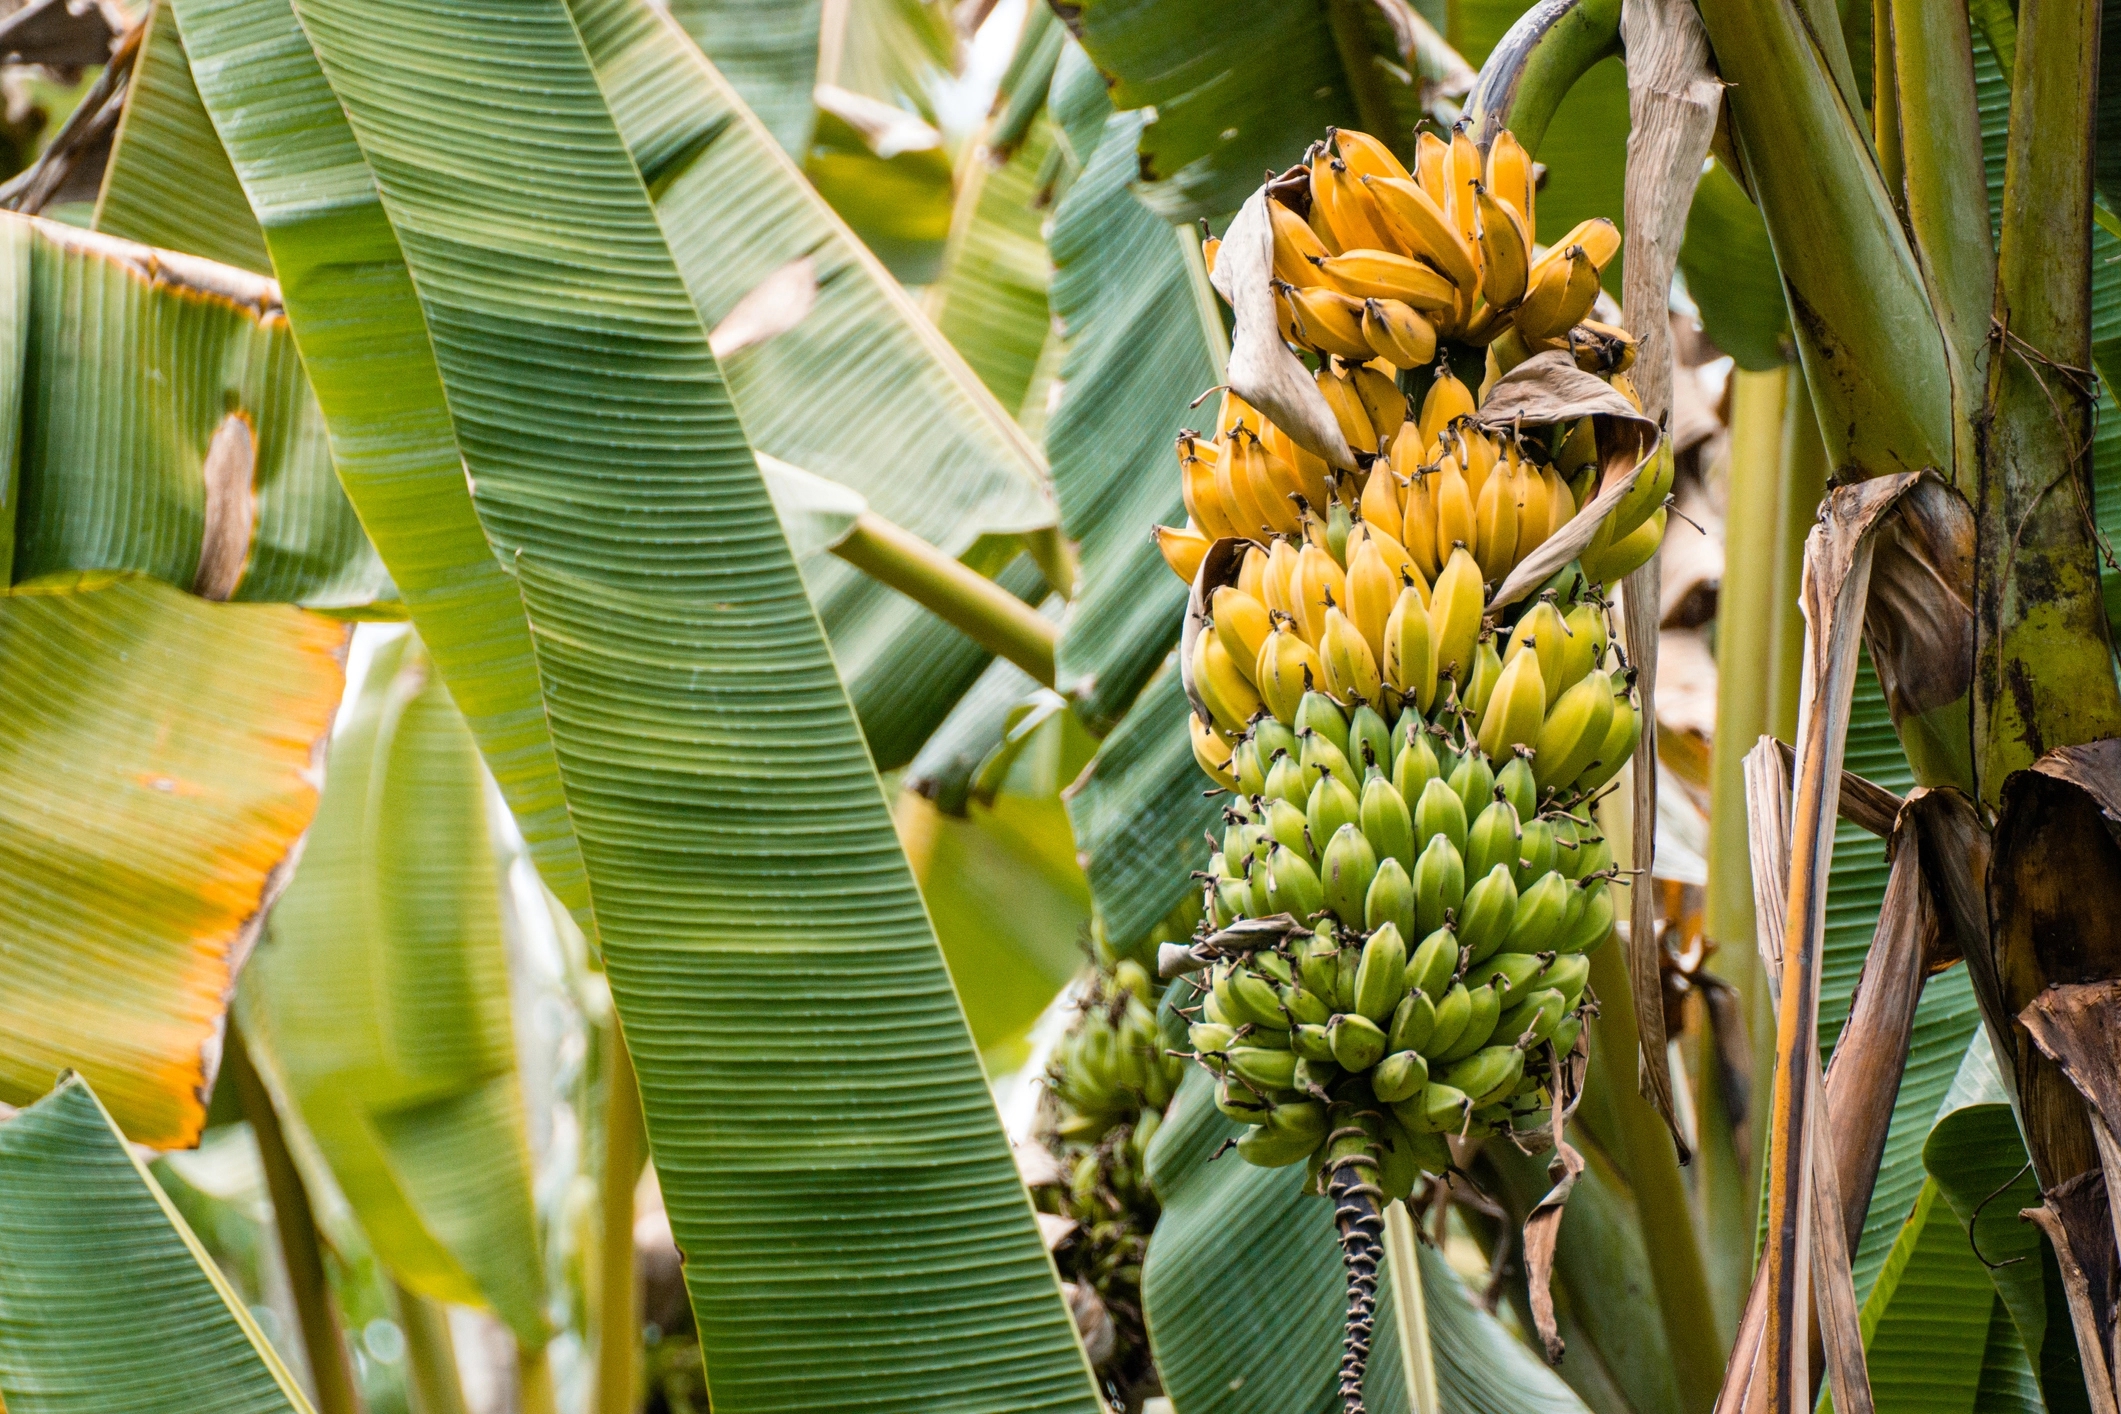 Banana tree with ripe and not yet fully ripe fruits.